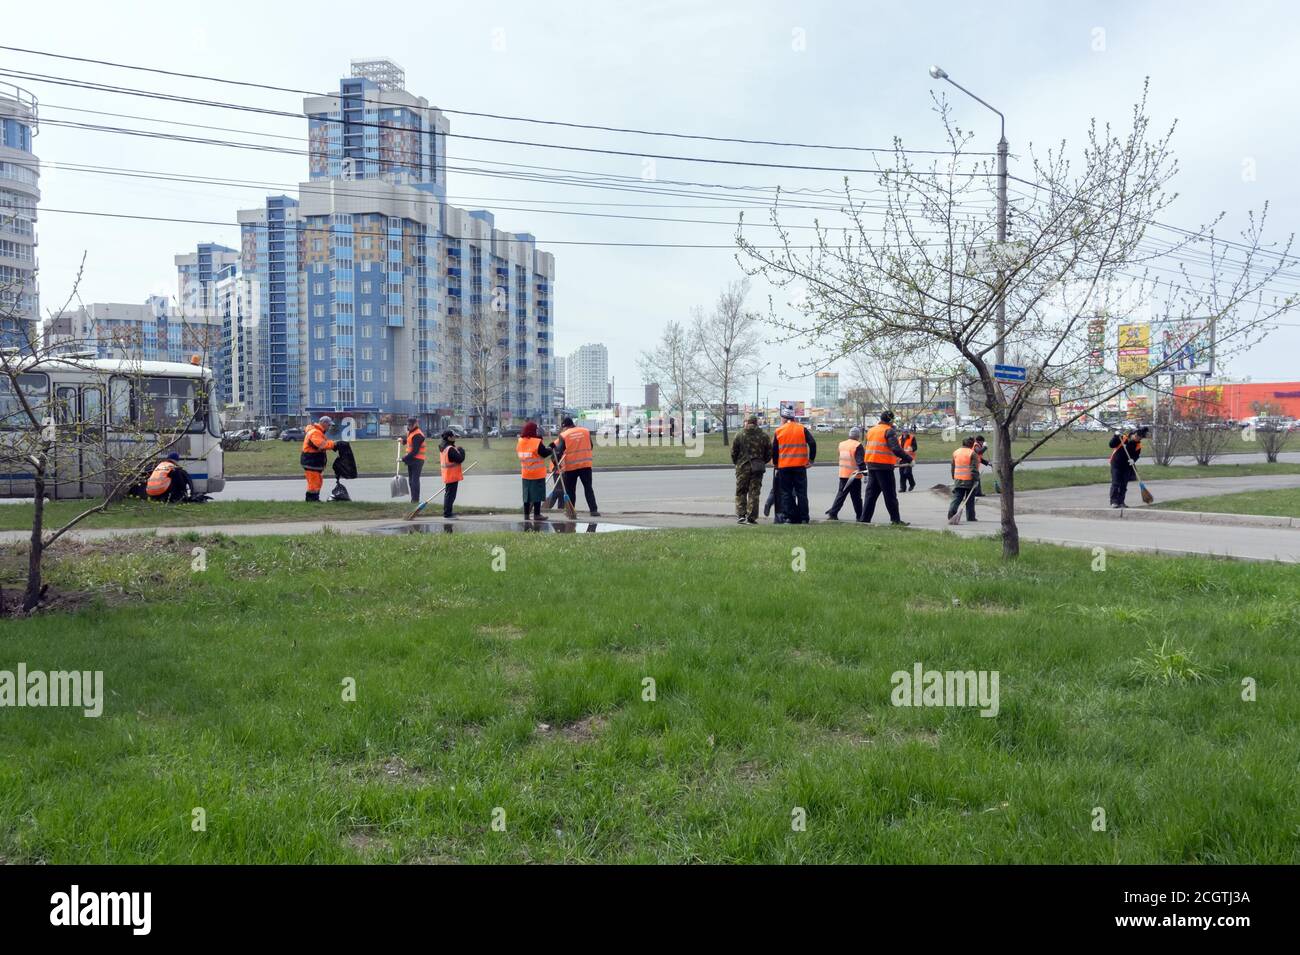 Group of cleaners of bright orange protective vests are sweeping the city sidewalk on a spring street in a residential area. Stock Photo